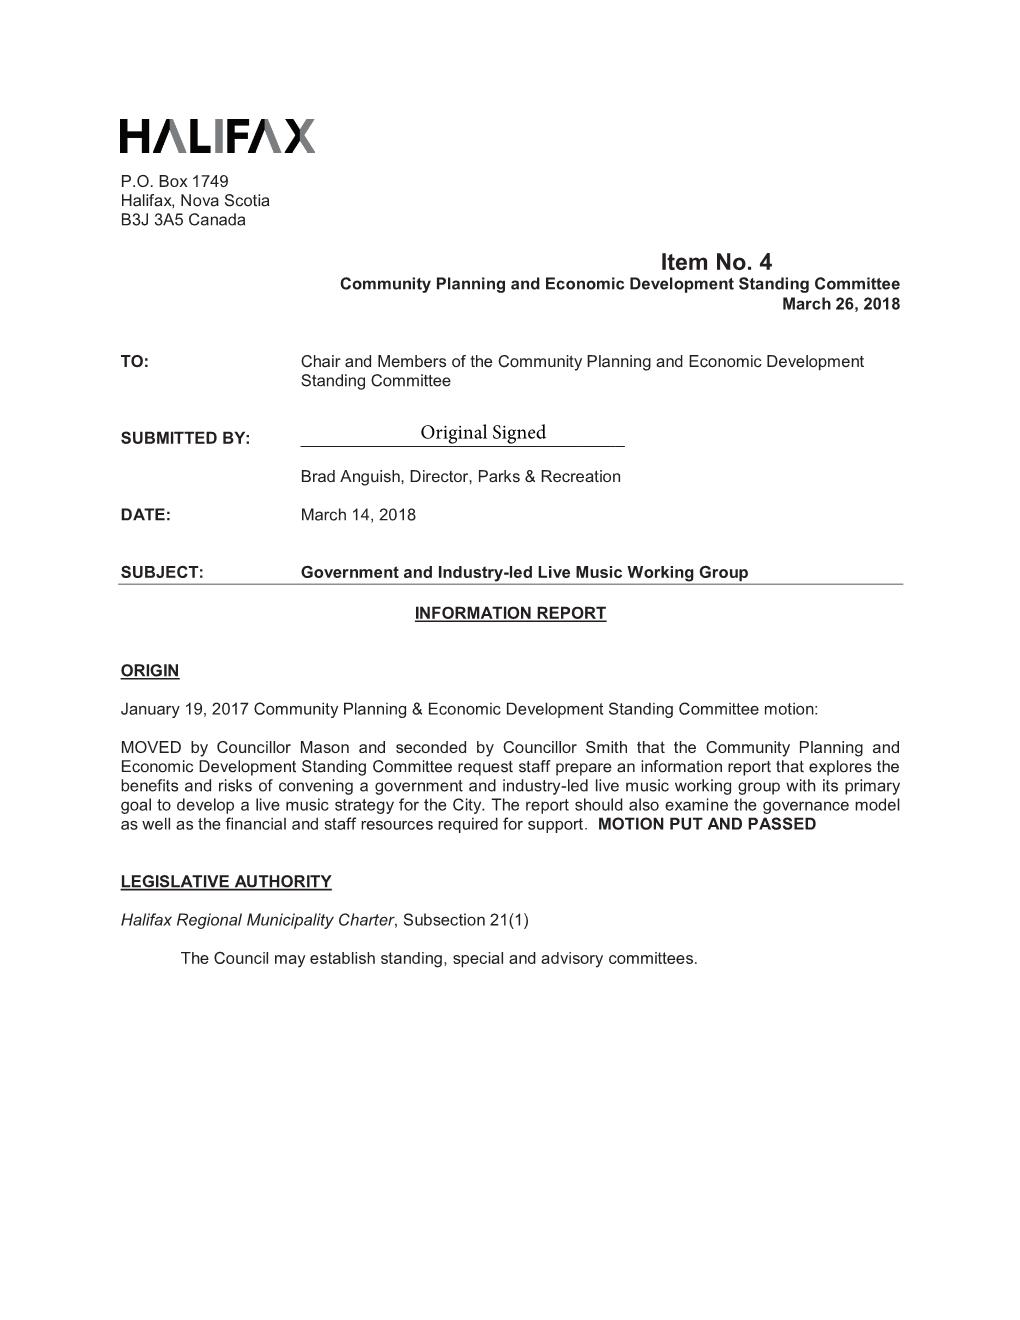 Item No. 4 Community Planning and Economic Development Standing Committee March 26, 2018